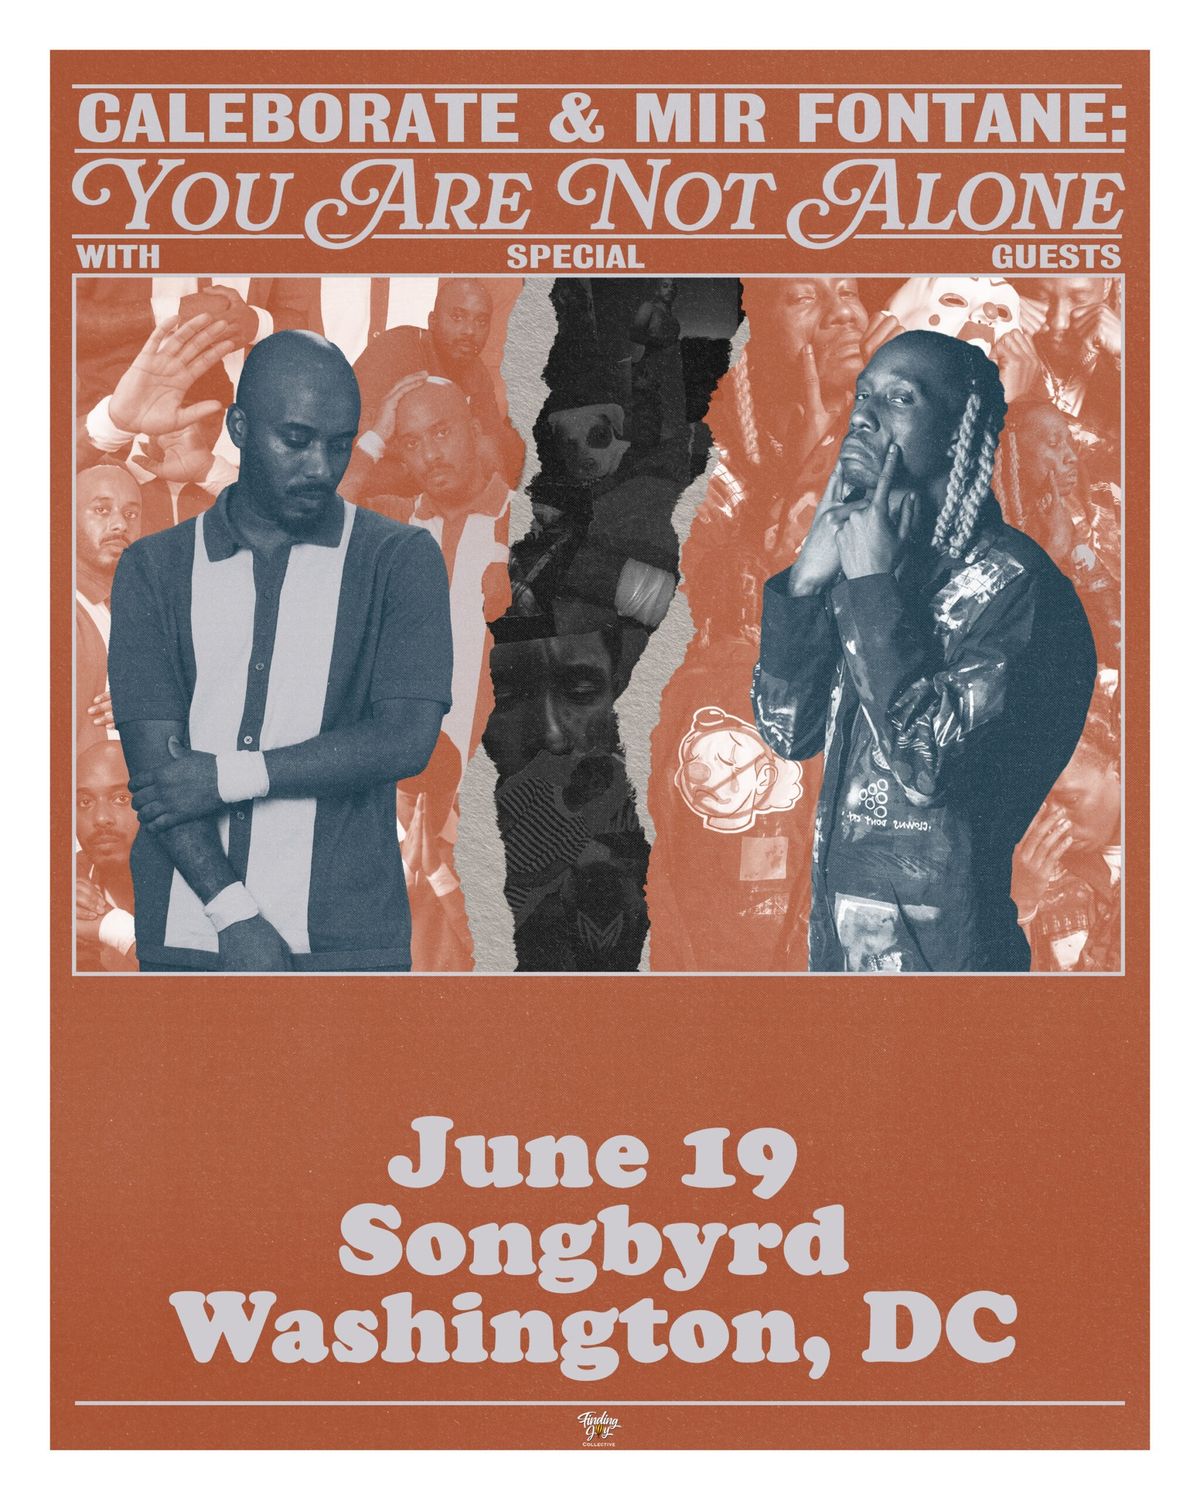 Mir Fontane | Caleborate You Are Not Alone Tour at Songbyrd DC